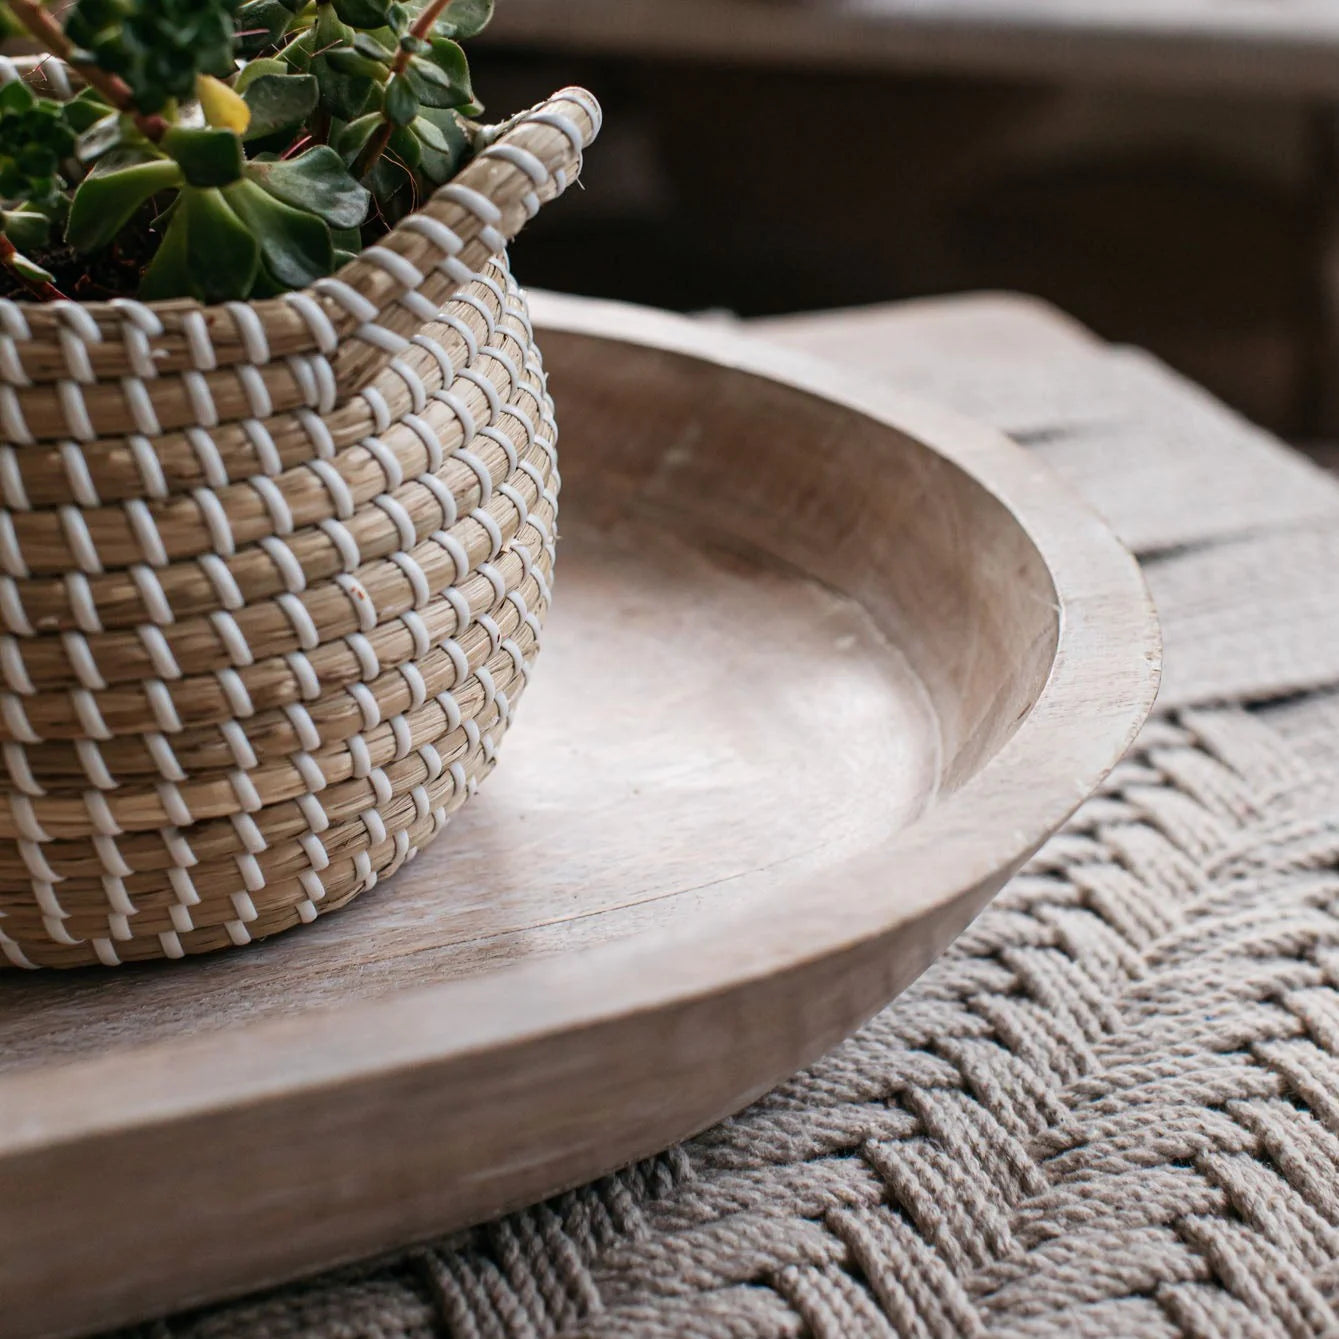 A close up image of an oval shaped mango wood tray, a small plant in a woven basket sits on top.